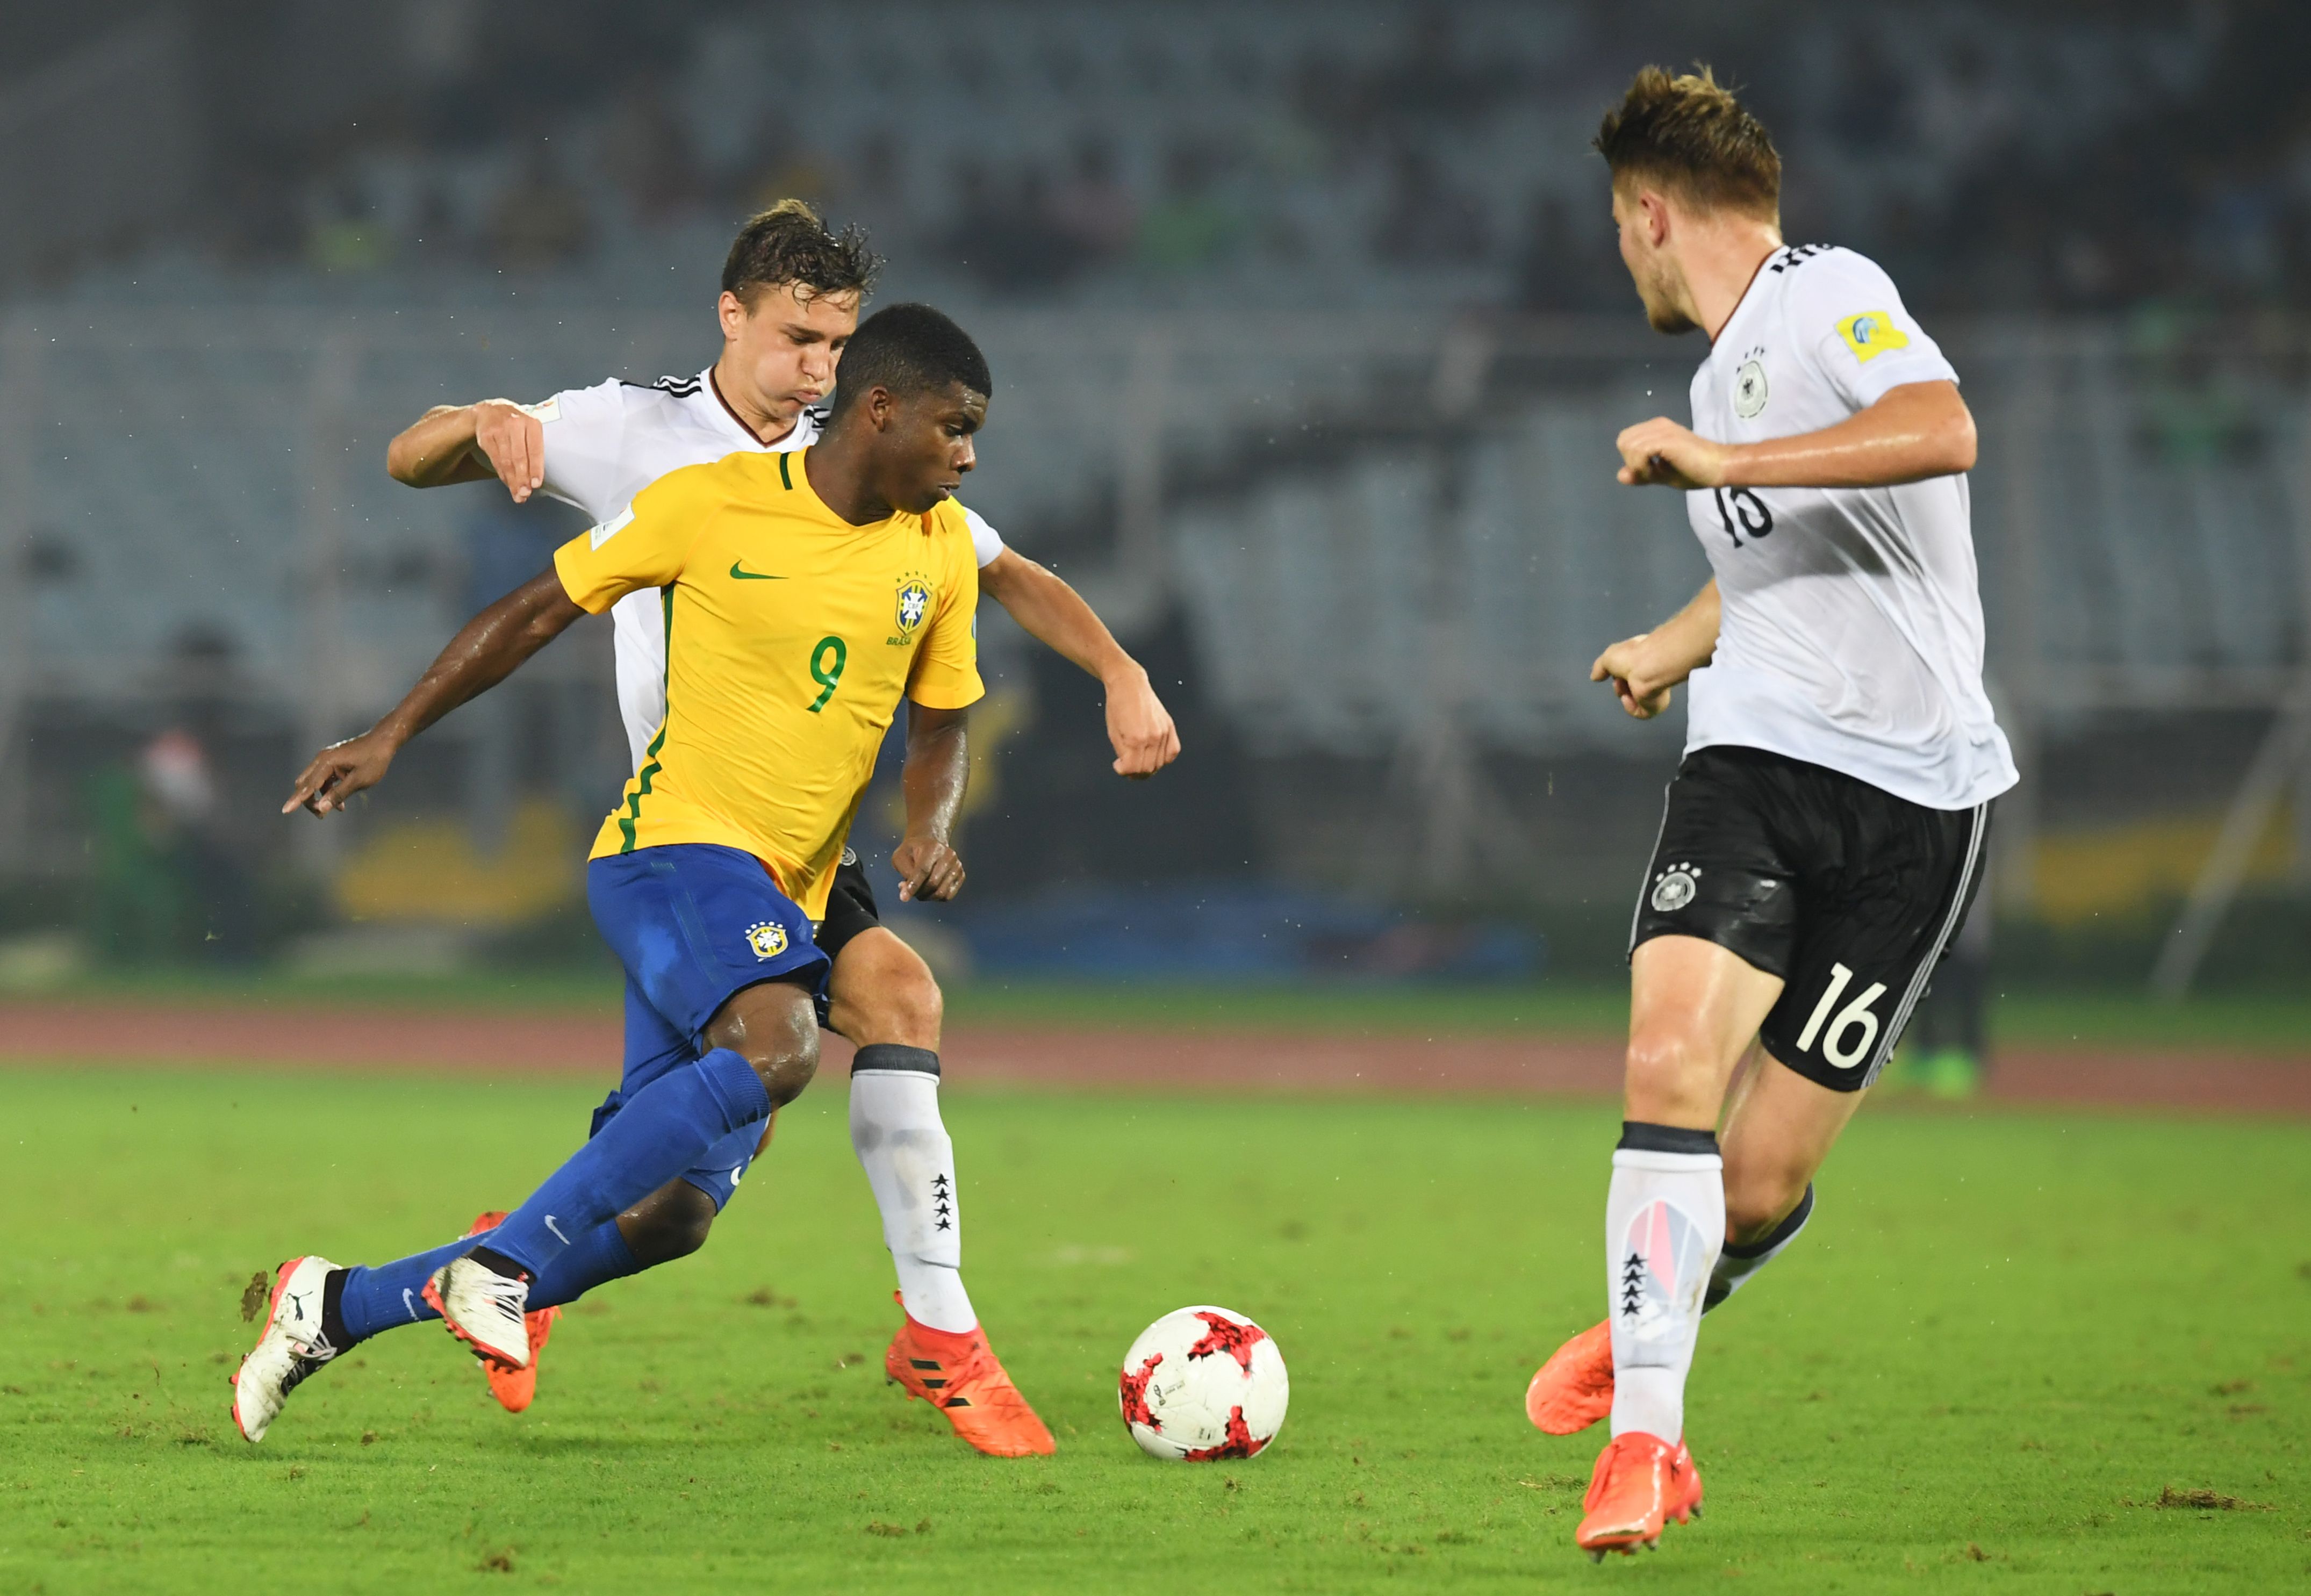 Alexander Nitzl (L) of Germany and Lincoln (2L) of Brazil compete for the ball during the quarterfinal football match of the FIFA U-17 World Cup at the Vivekananda Yuba Bharati Krirangan stadium in Kolkata on October 22, 2017.
The FIFA U-17 Football World Cup is taking place in India from October 6 to 28. / AFP PHOTO / Dibyangshu SARKAR        (Photo credit should read DIBYANGSHU SARKAR/AFP/Getty Images)